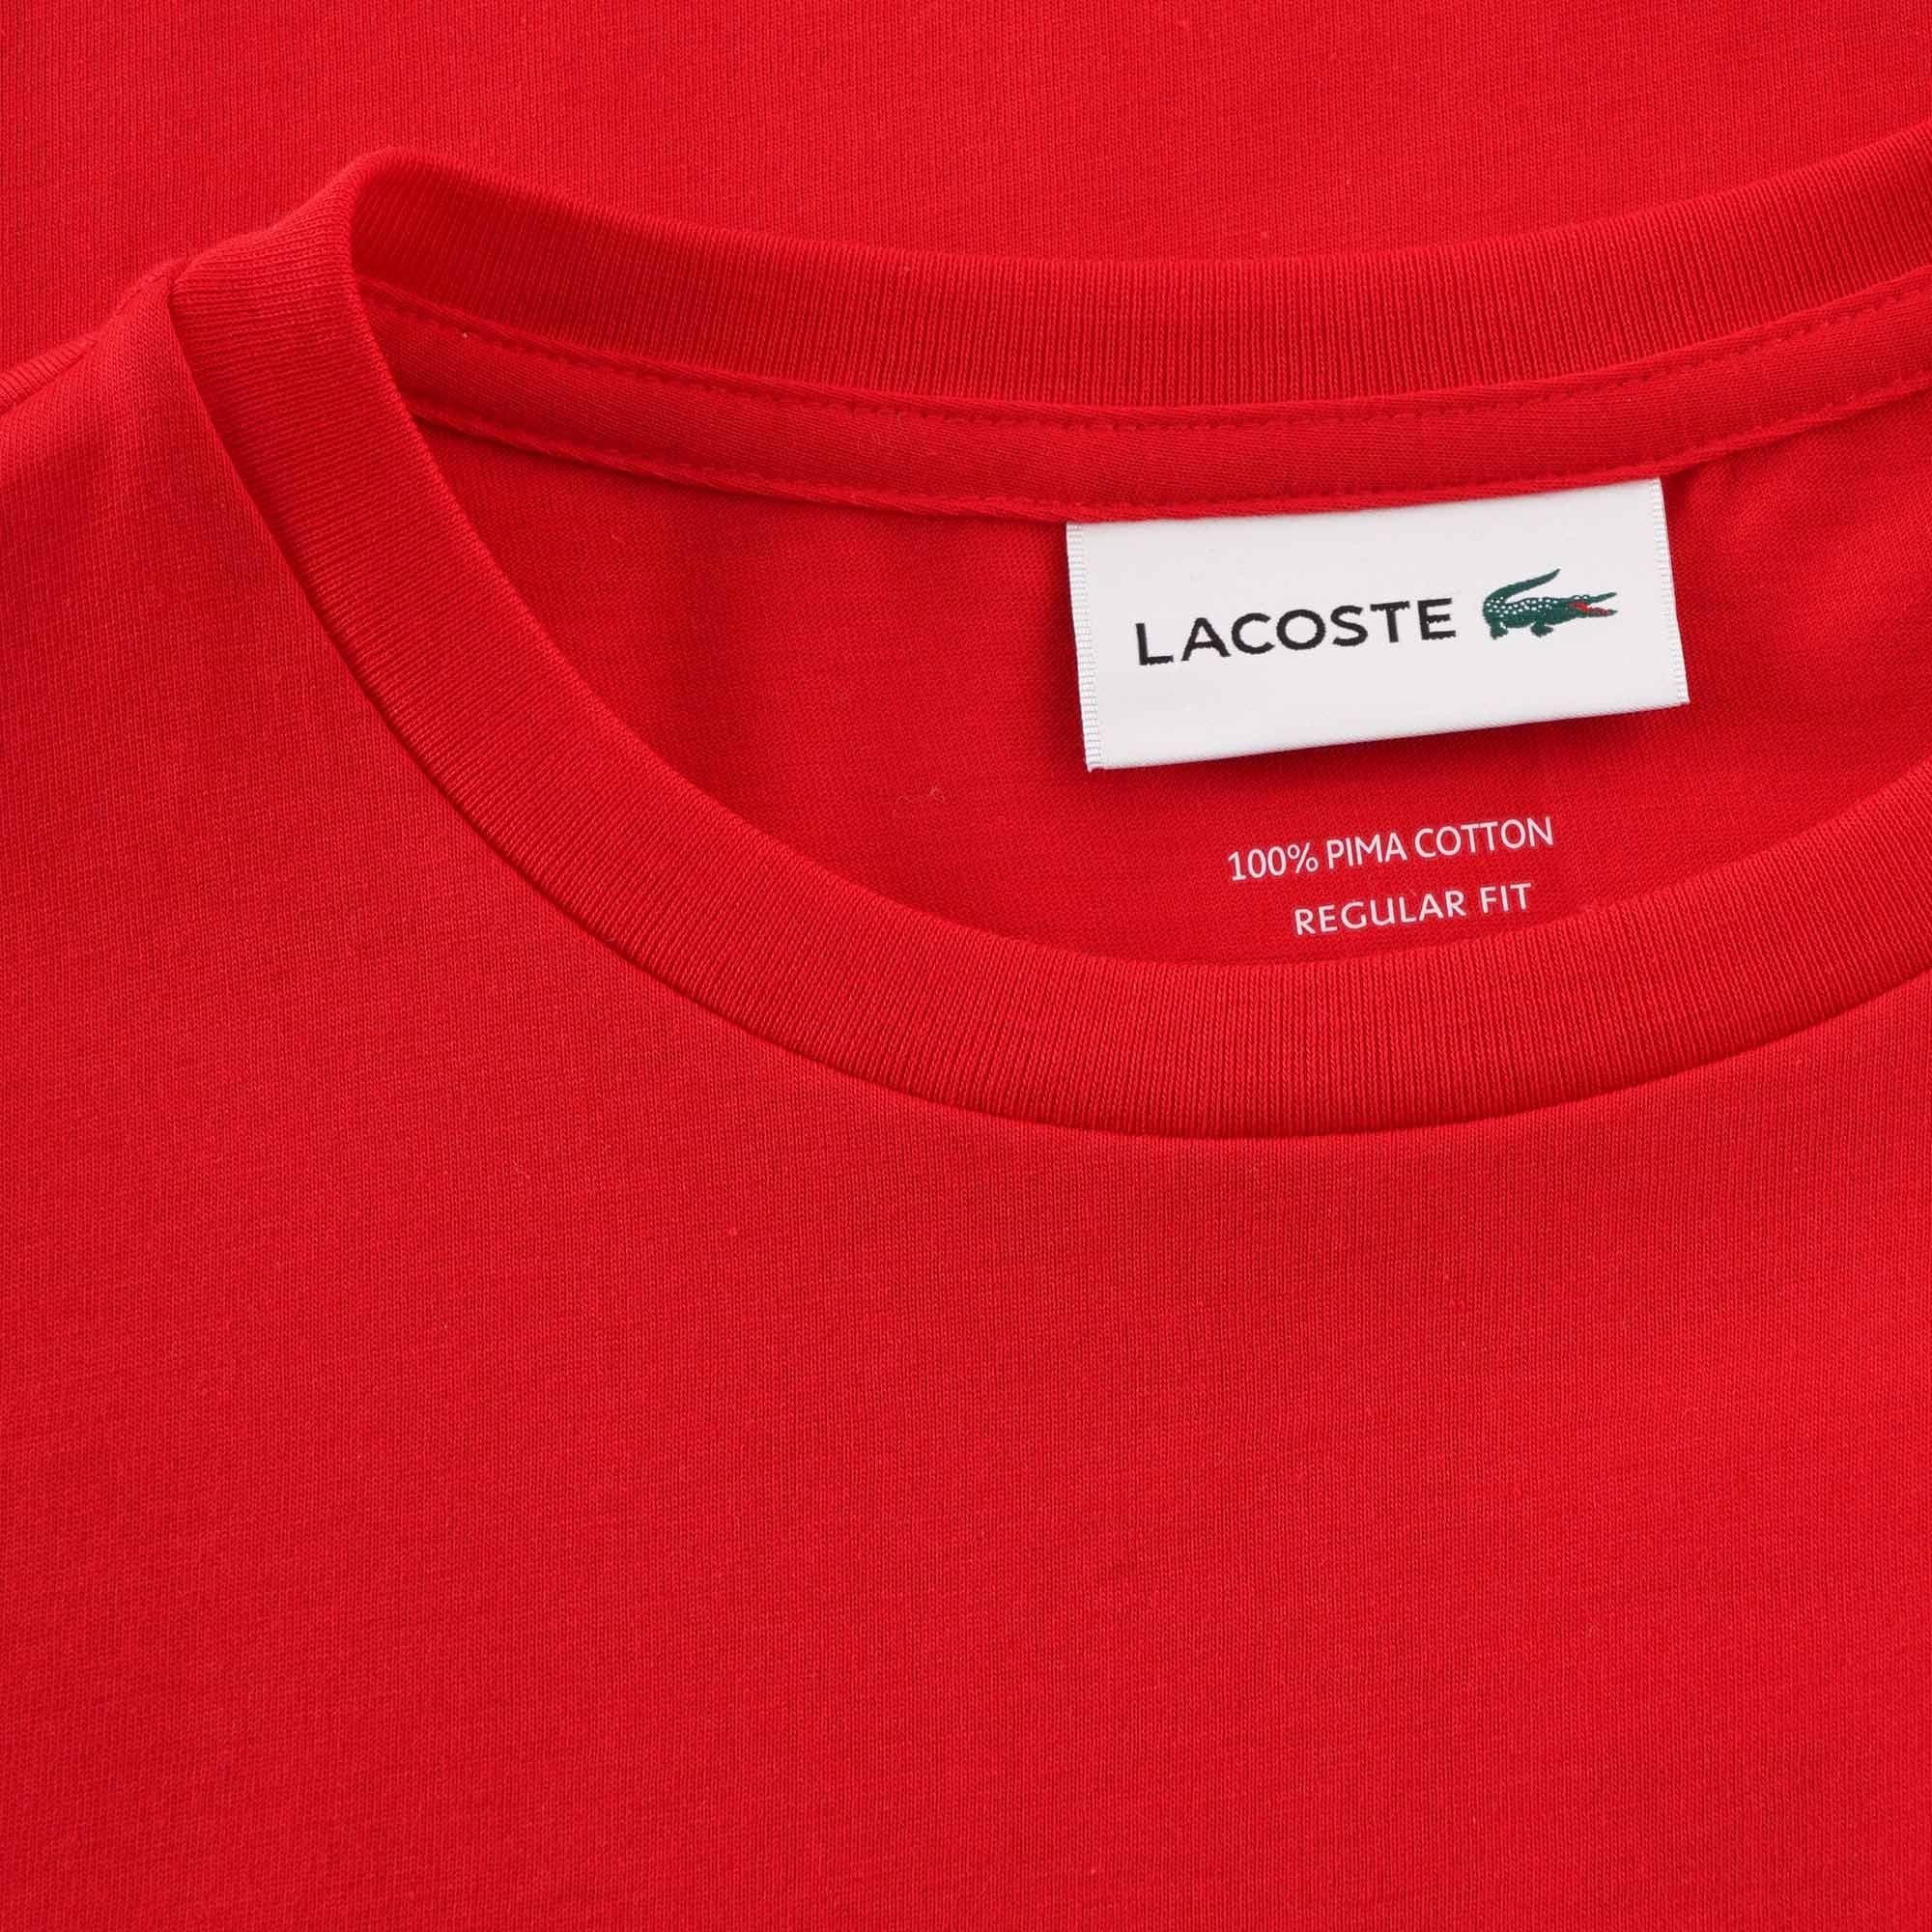 Lacoste Crew Neck Pima Cotton Jersey T-shirt in Red for Men - Lyst